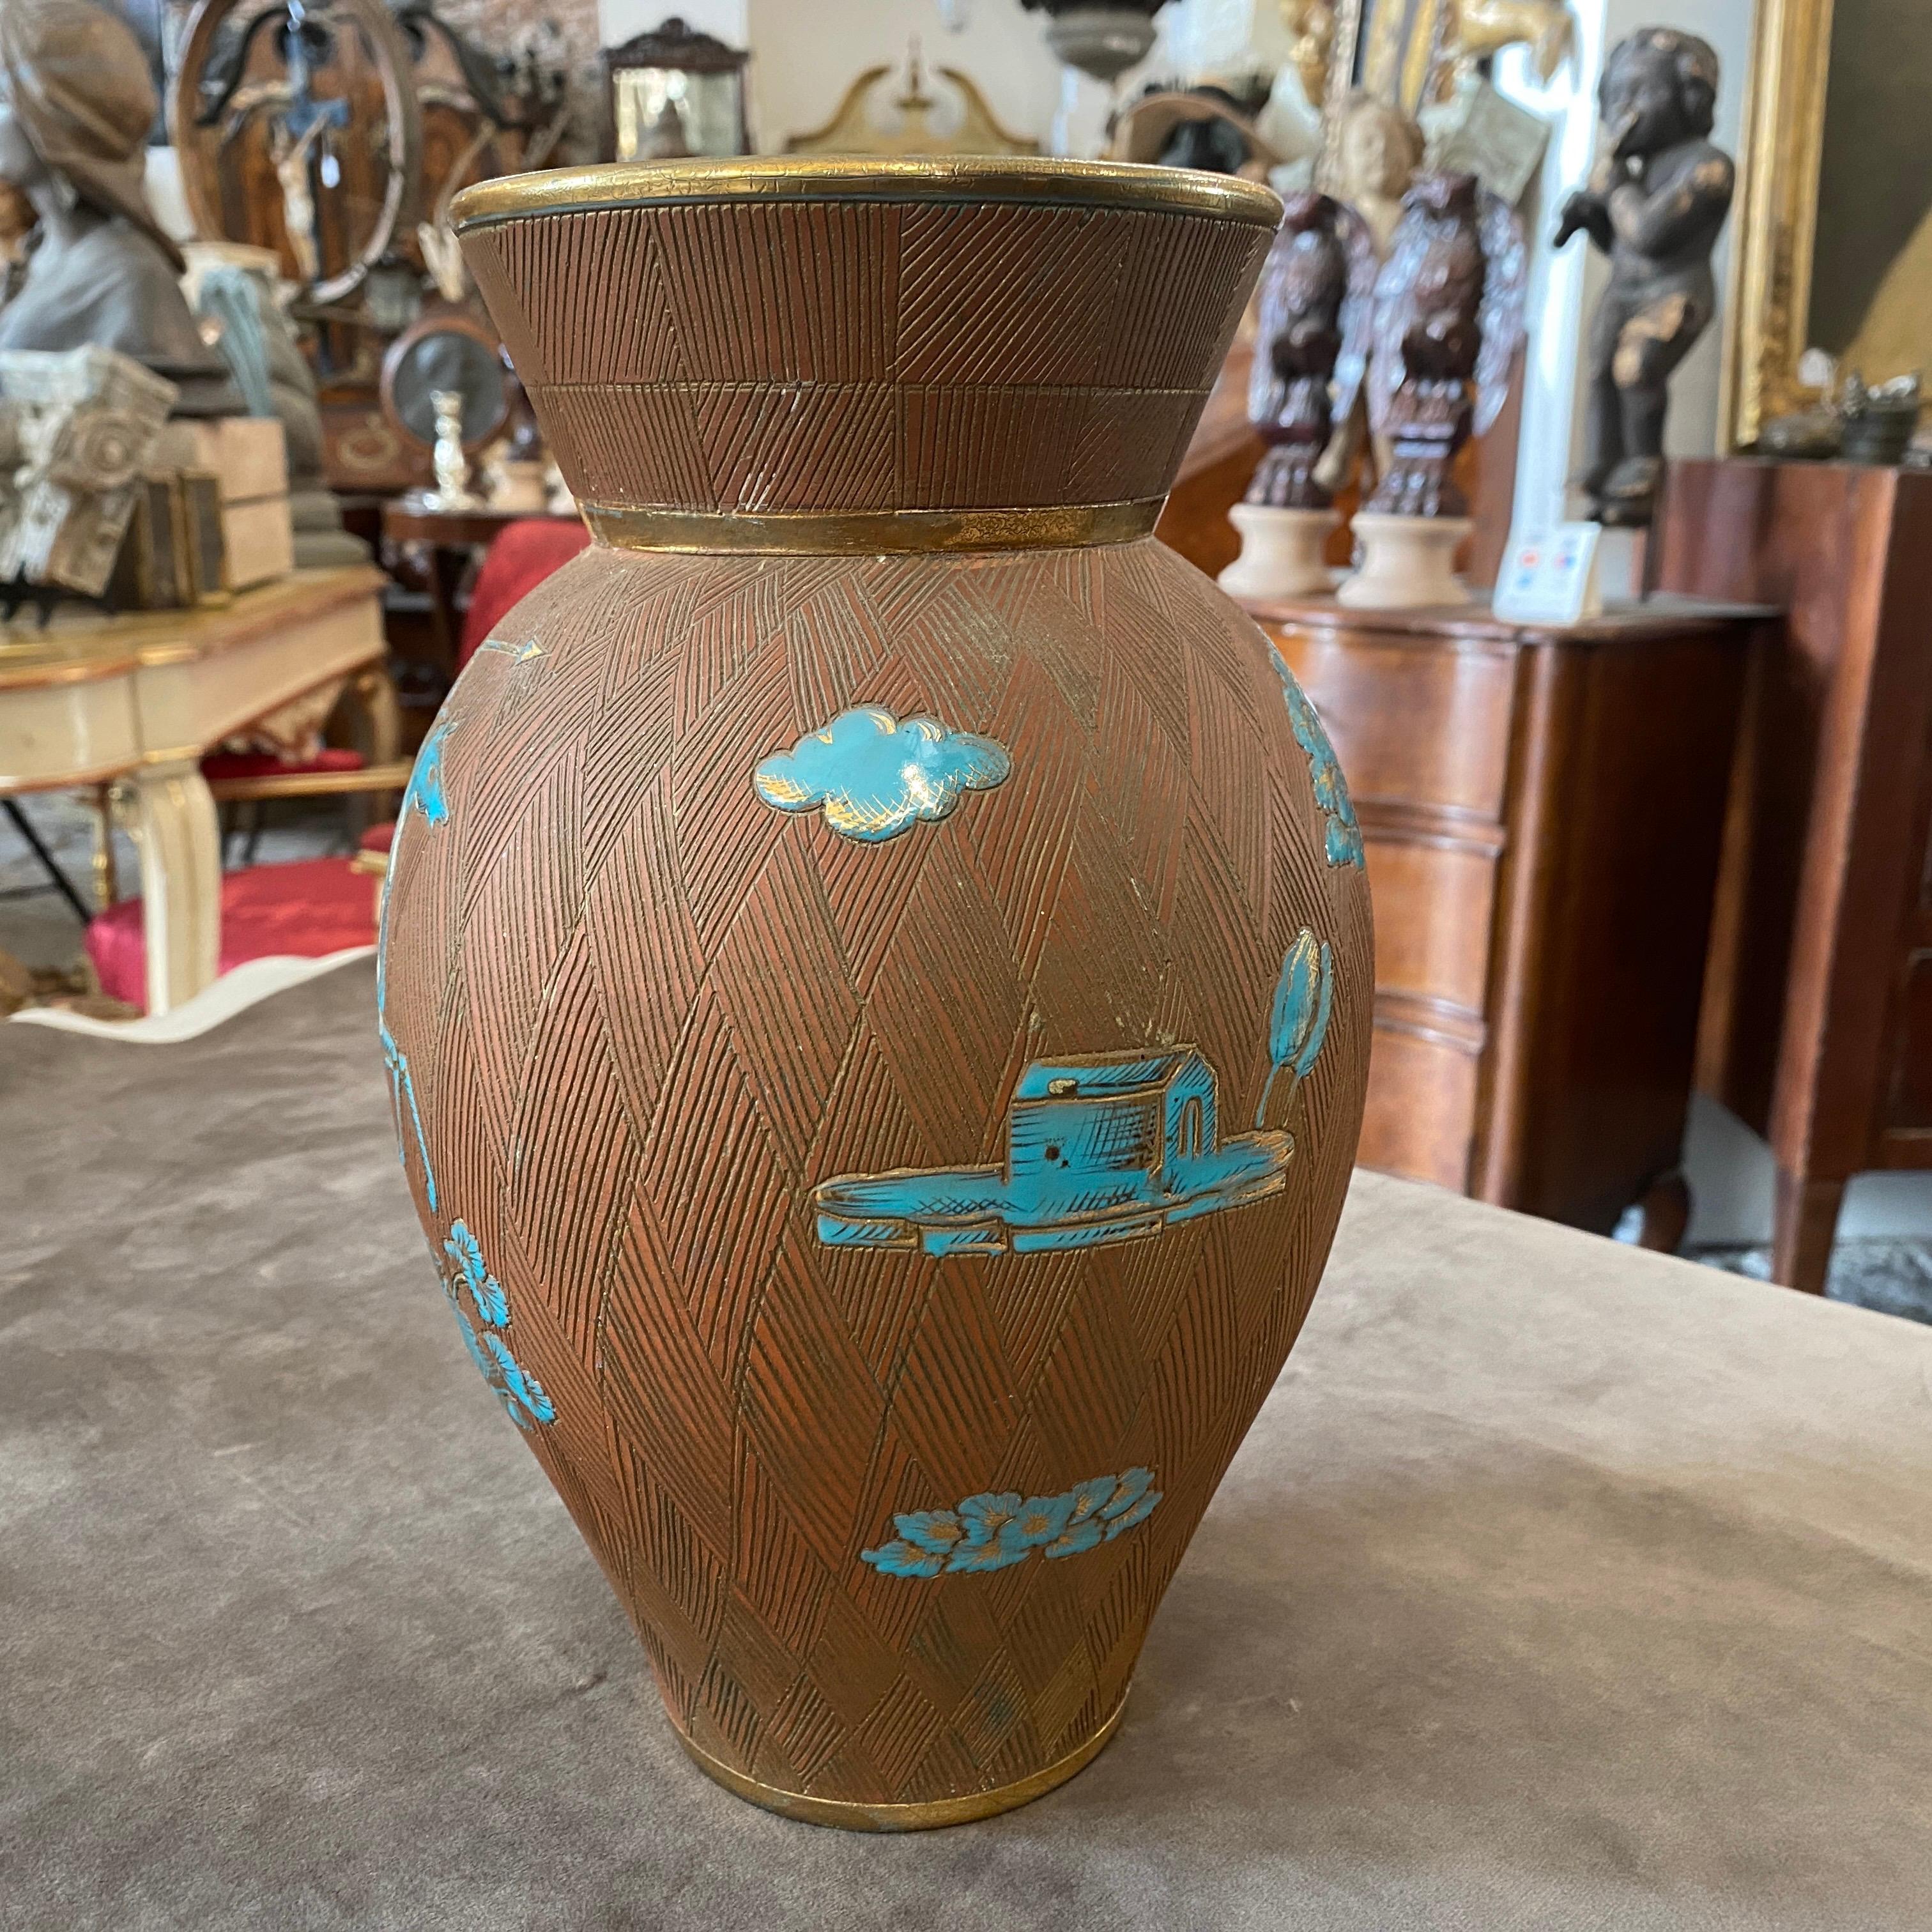 An hand painted turquoise and brown ceramic designed and hand-crafted by Ceramiche Fantechi of Sesto Fiorentino, it's made in Italy in the 1950s. Labeled on the bottom. This Vase by Fantechi is a striking example of Italian craftsmanship and